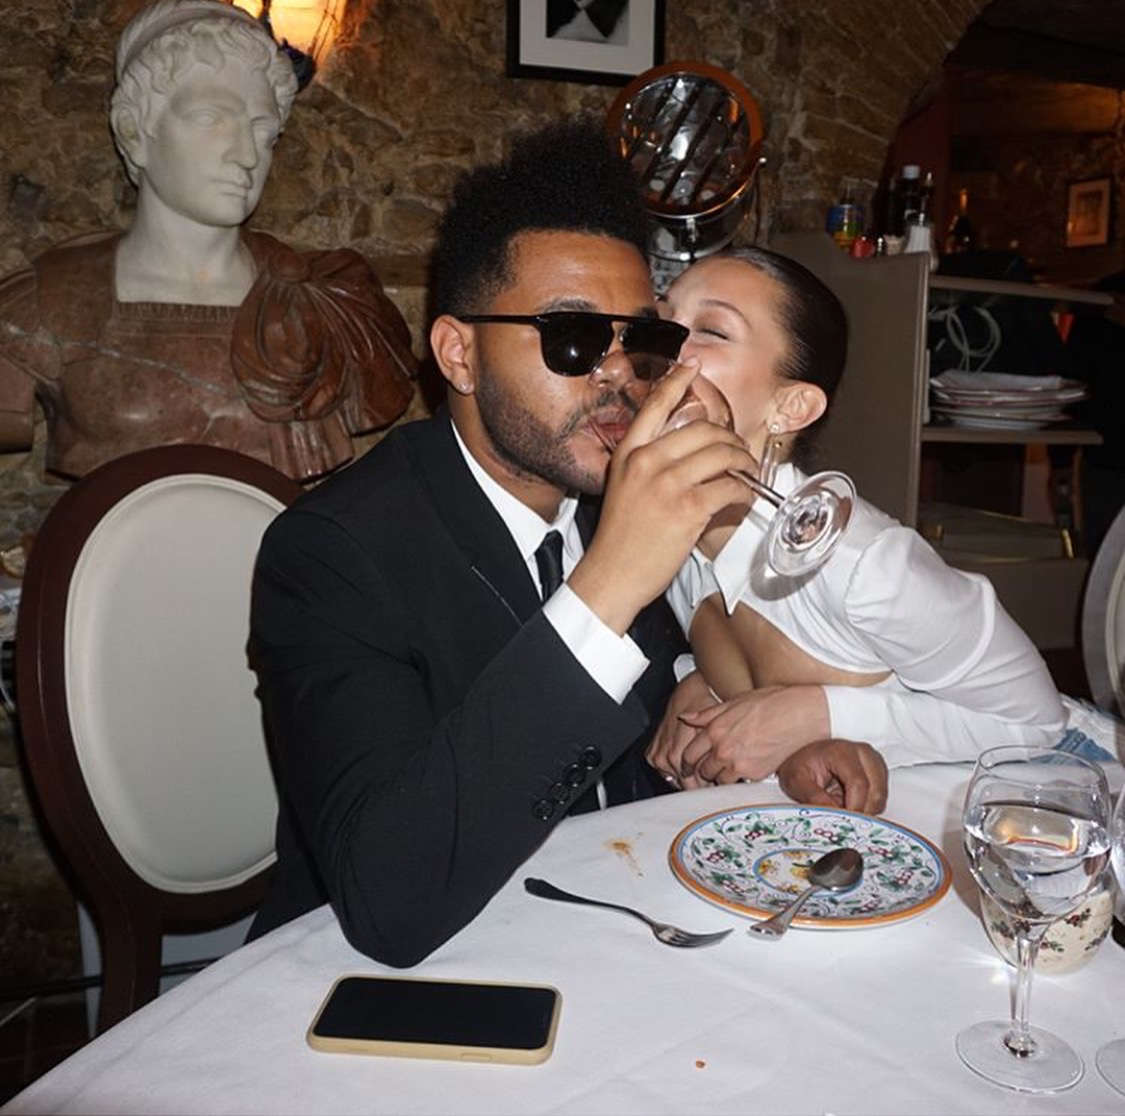 Bella Hadid showing major PDA with lover dumper and reigniter- the Weeknd